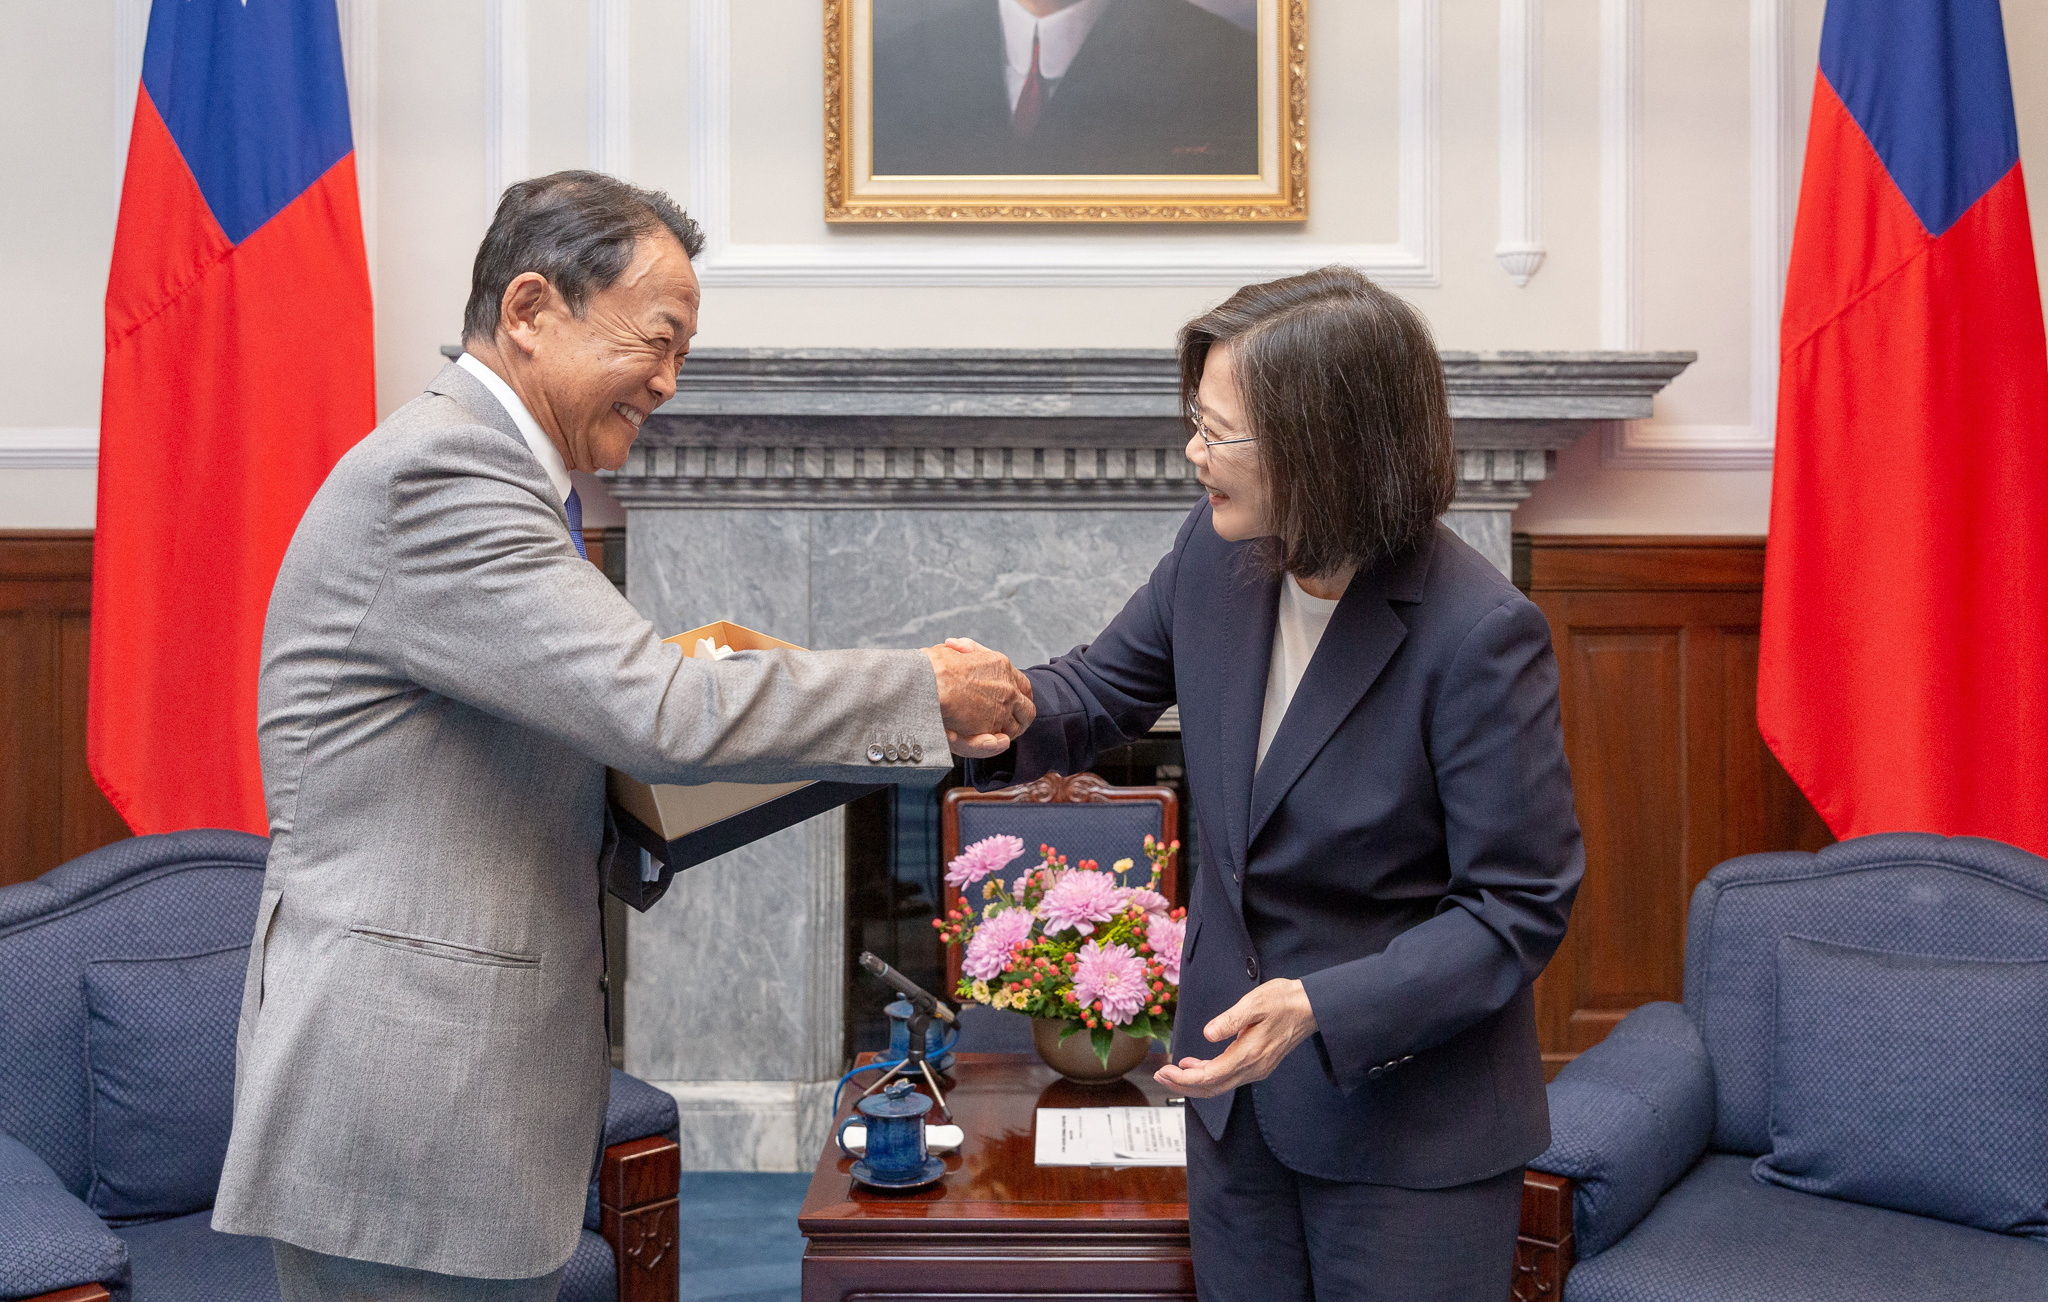 Taiwan's President Tsai Ing-wen and Japan's former prime minister and current vice-president of the ruling Liberal Democratic Party, Taro Aso, shake hands during their meeting at the presidential office in Taipei